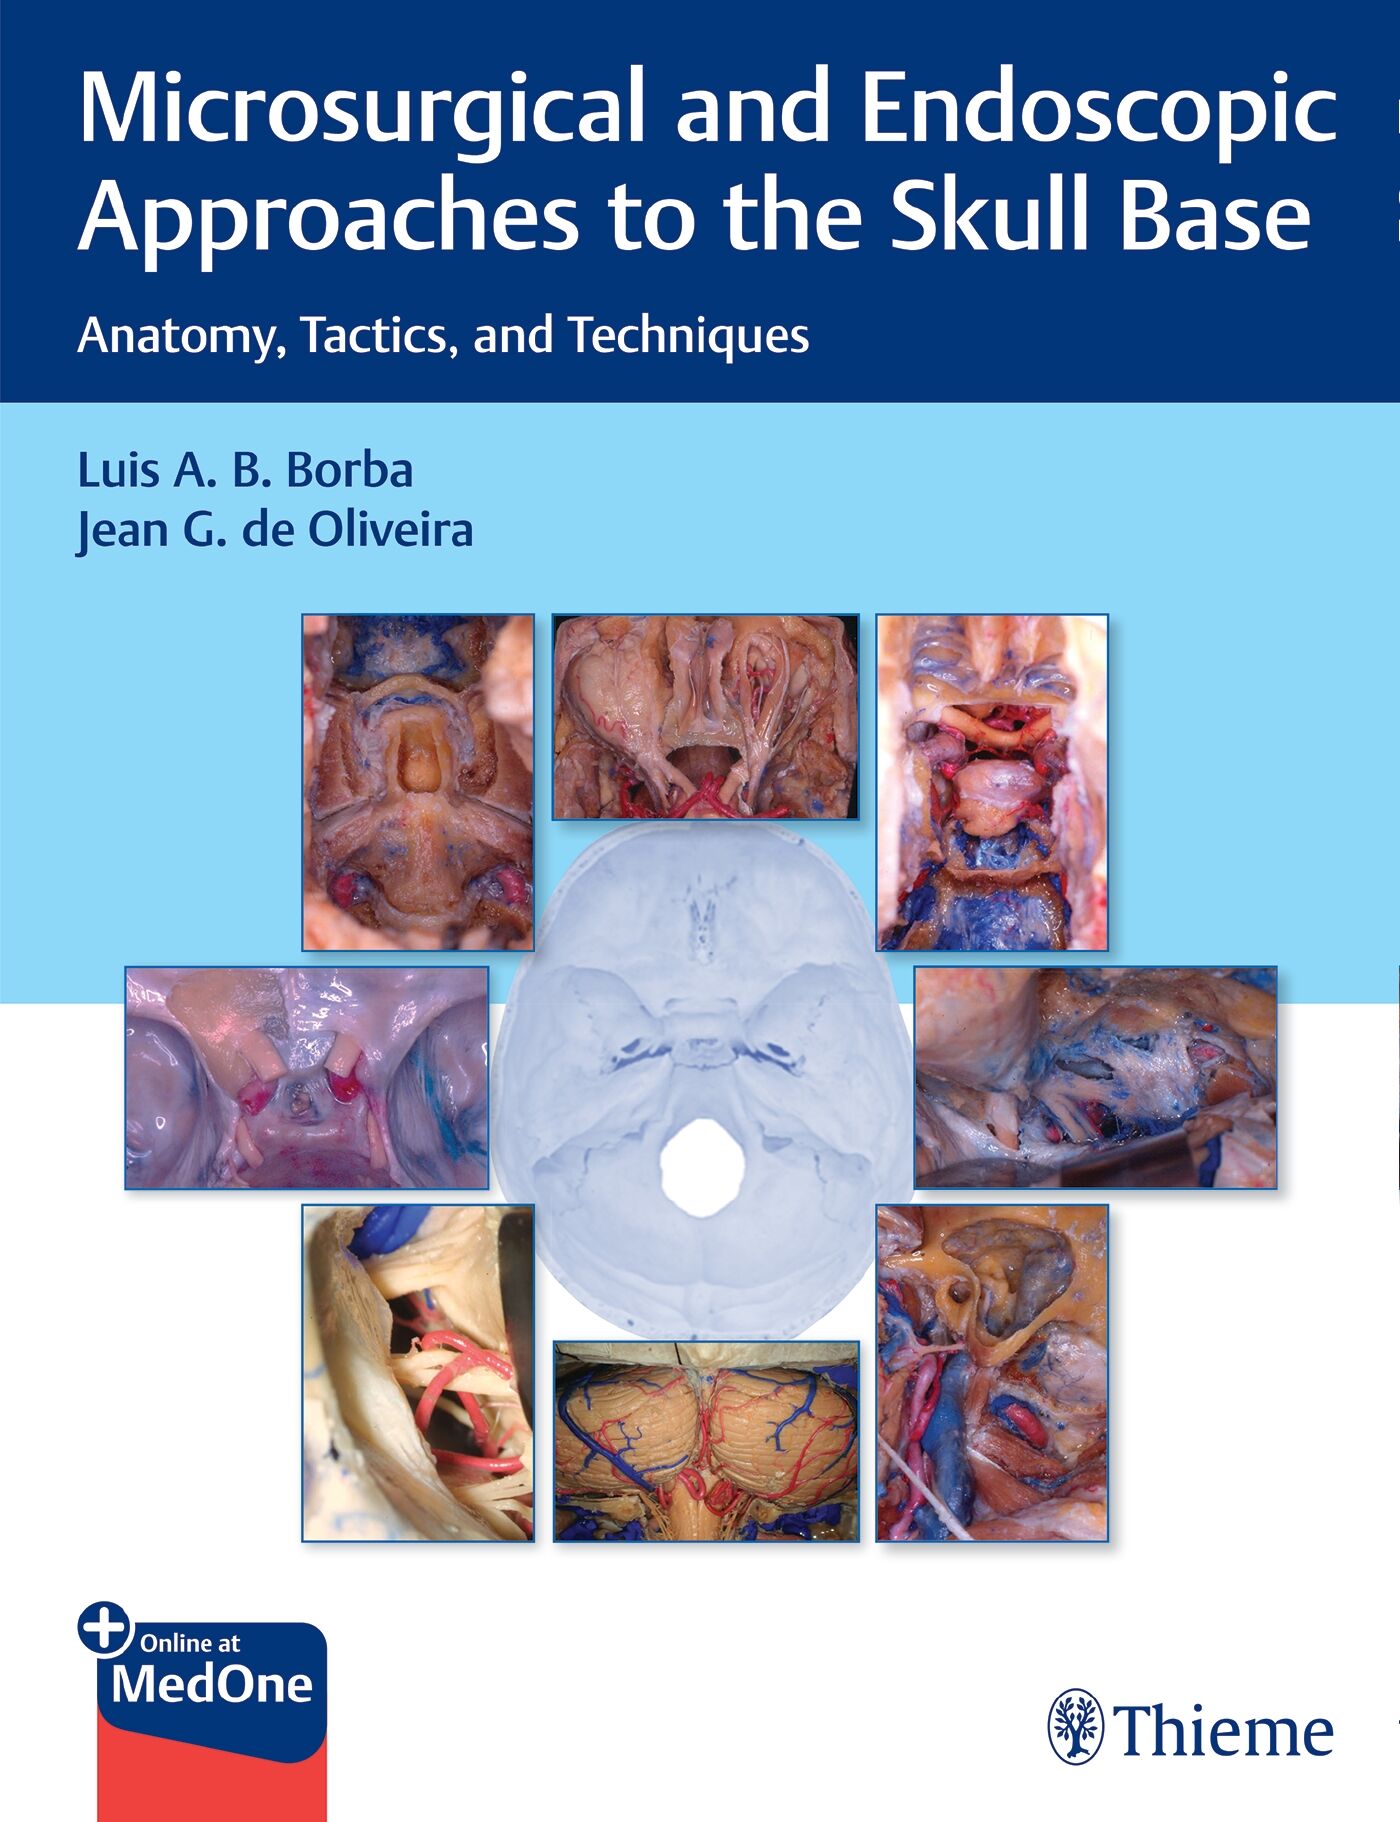 Microsurgical and Endoscopic Approaches to the Skull Base, 9781626239661